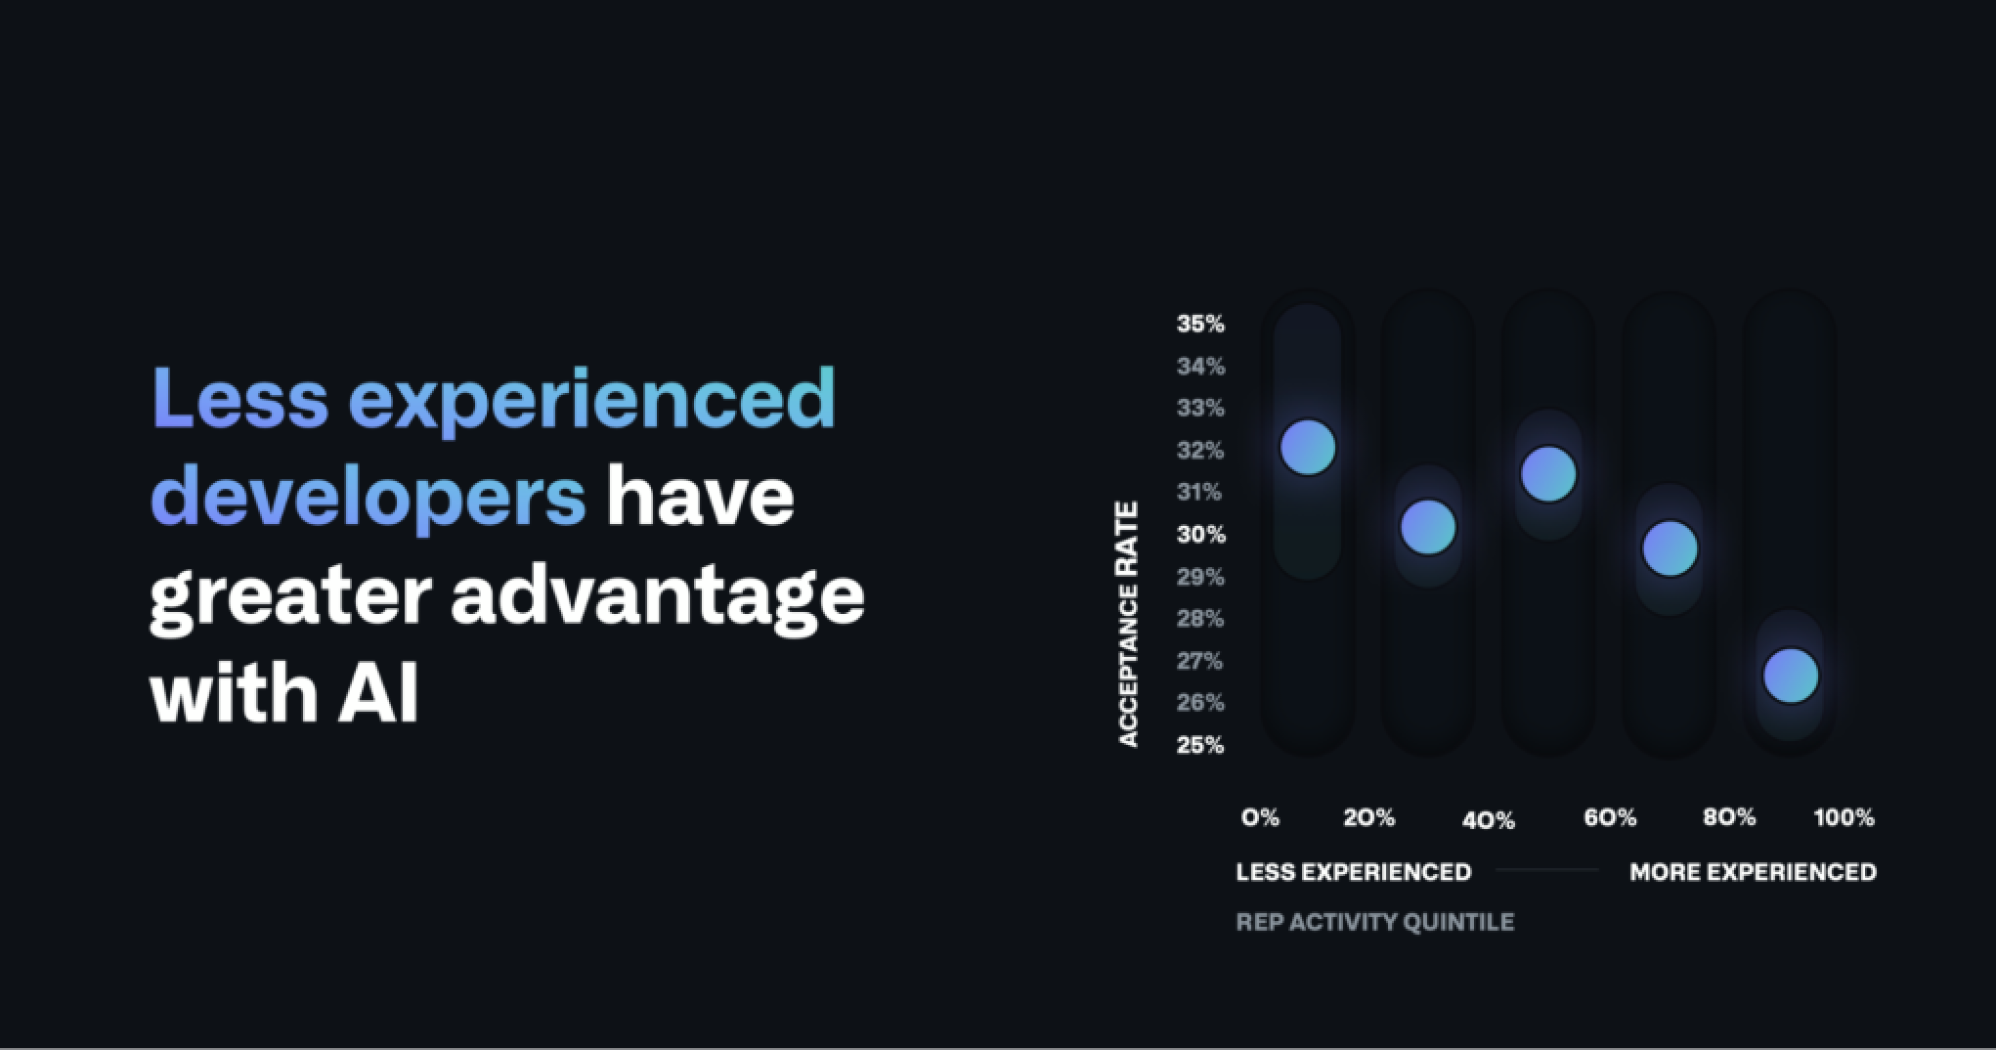 This figure shows that developers with less experience benefit relatively more than more experienced developers.